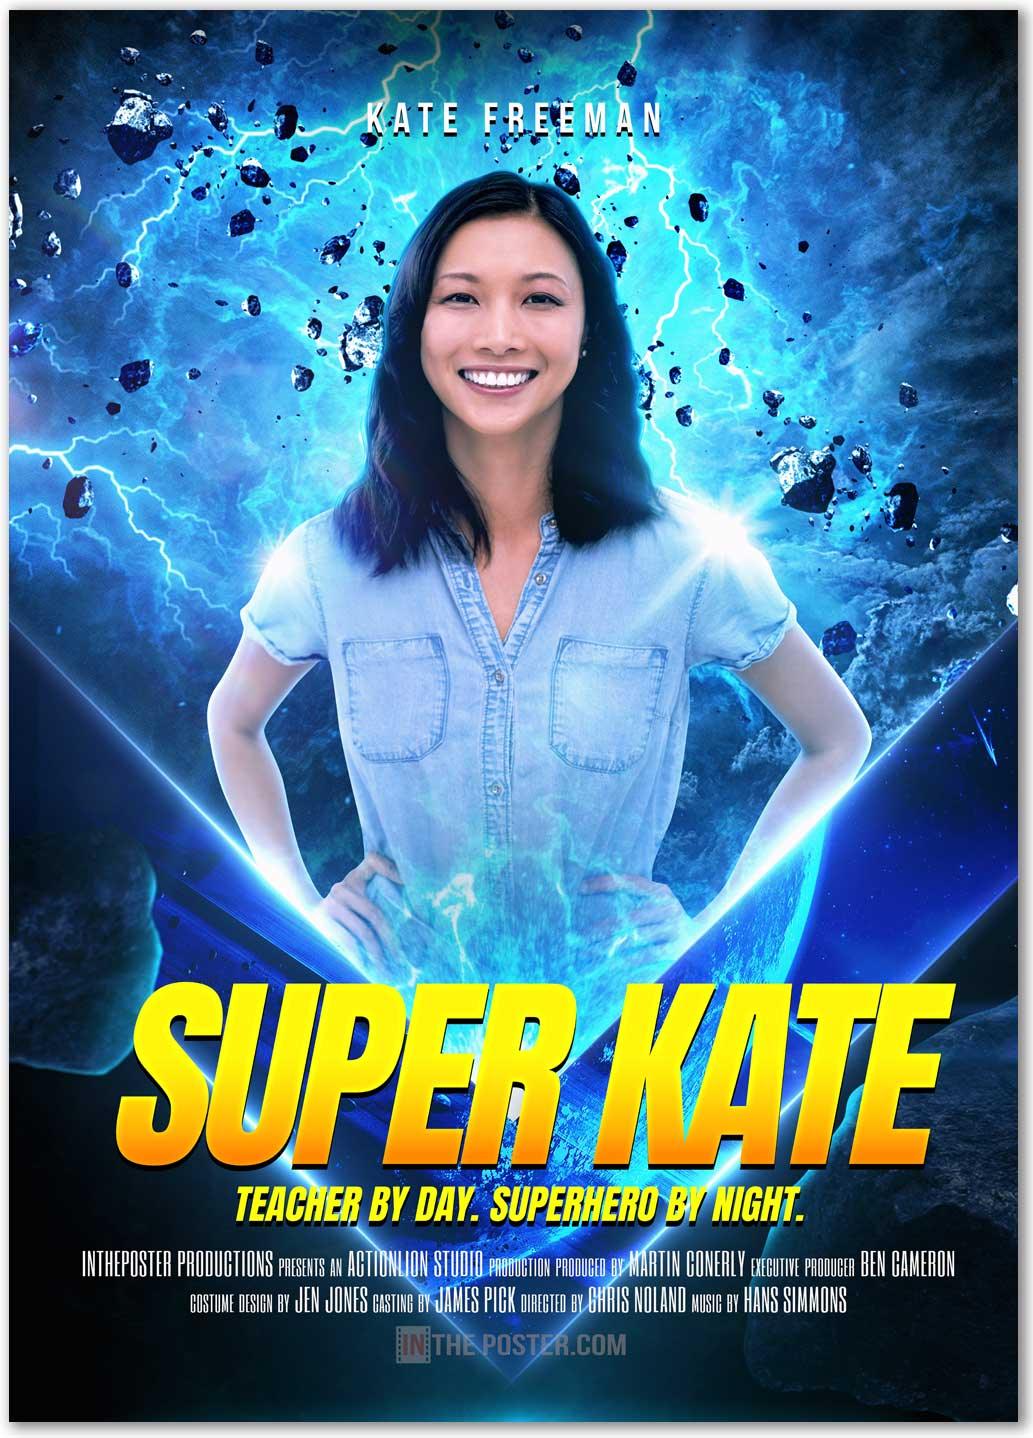 Custom Super Hero Movie Poster featuring a woman in a blue jean shirt with hands on her hips, in space surrounded by lightening and asteroids. The logo Super Kate in large yellow letters and a subtitle of teacher by day, superhero by night.